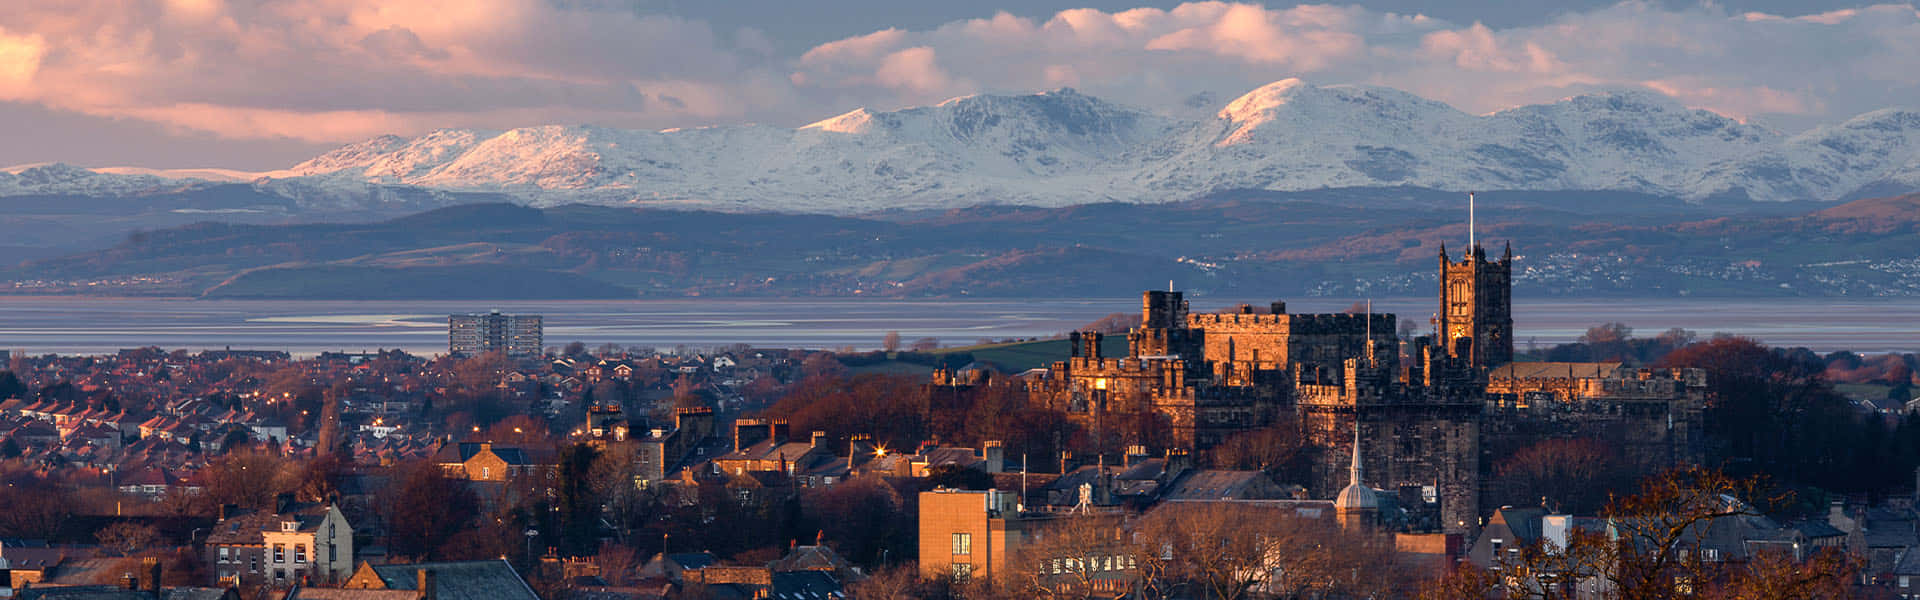 Lancaster Cityscapewith Snowy Mountains Wallpaper